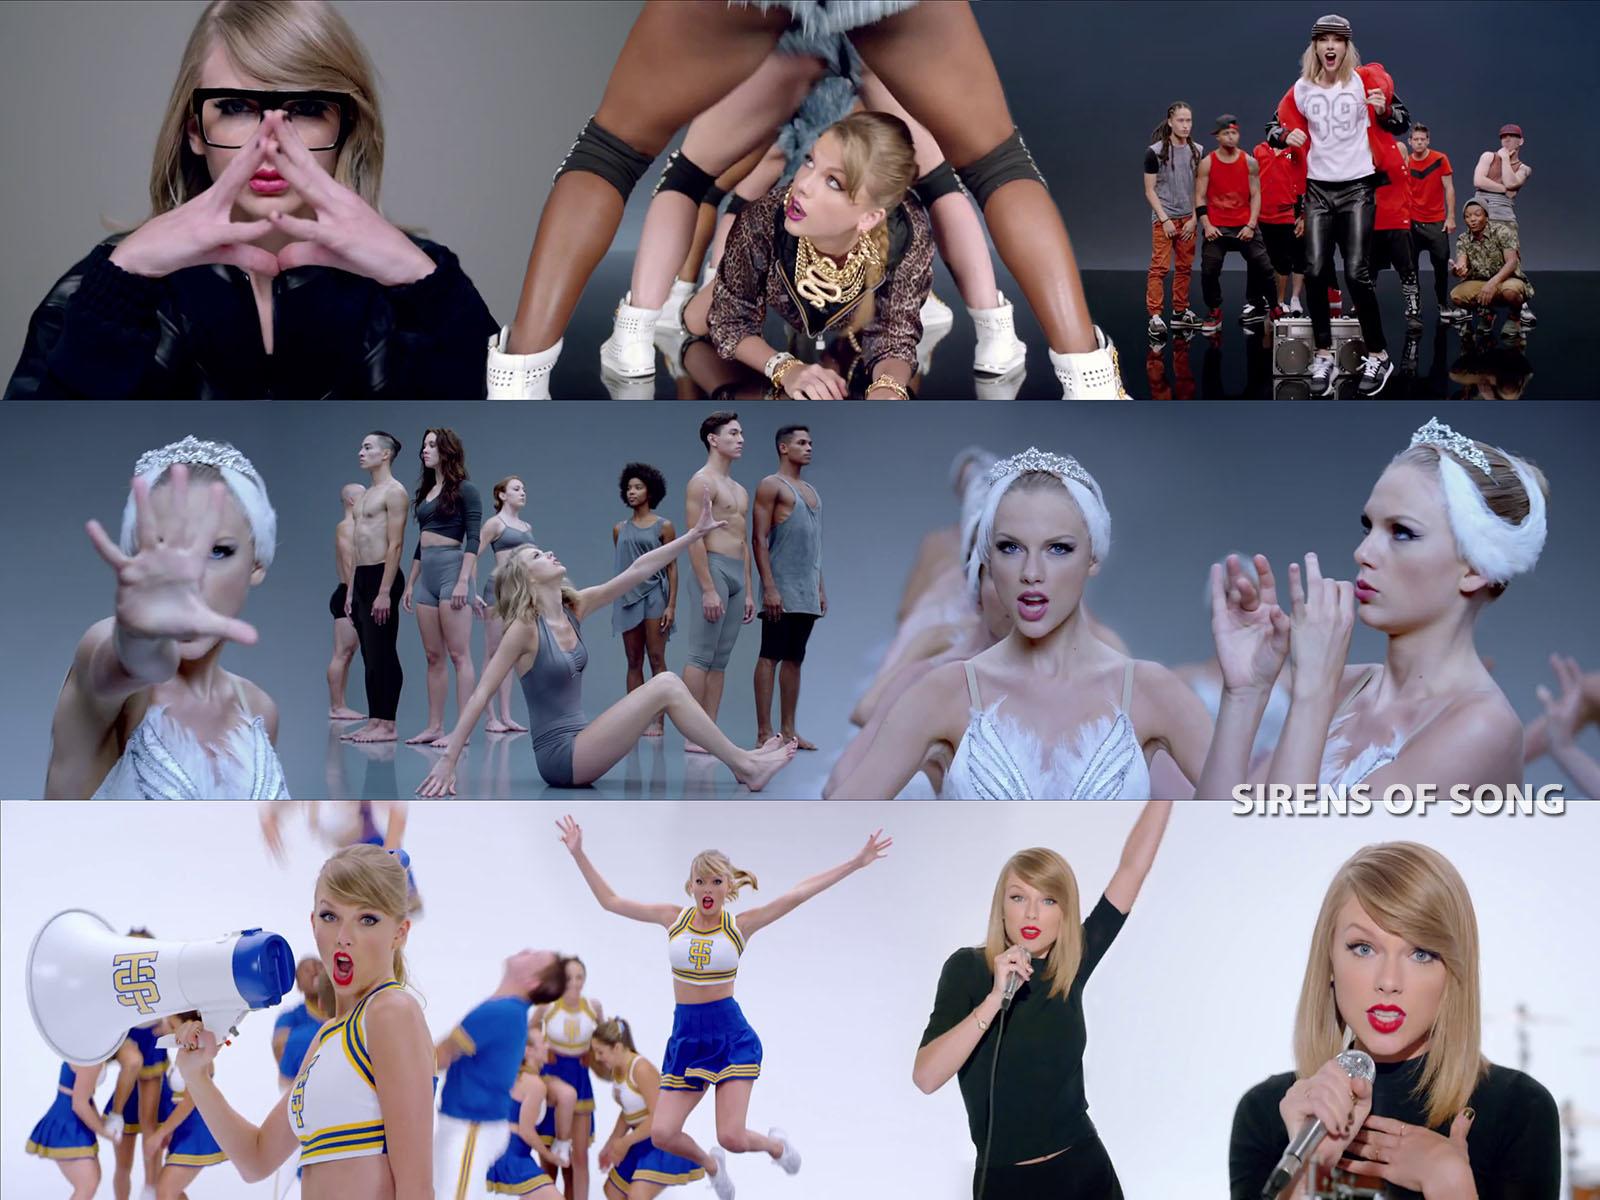 Taylor Swift - Shake It Off Vidcap " Sirens of Song.